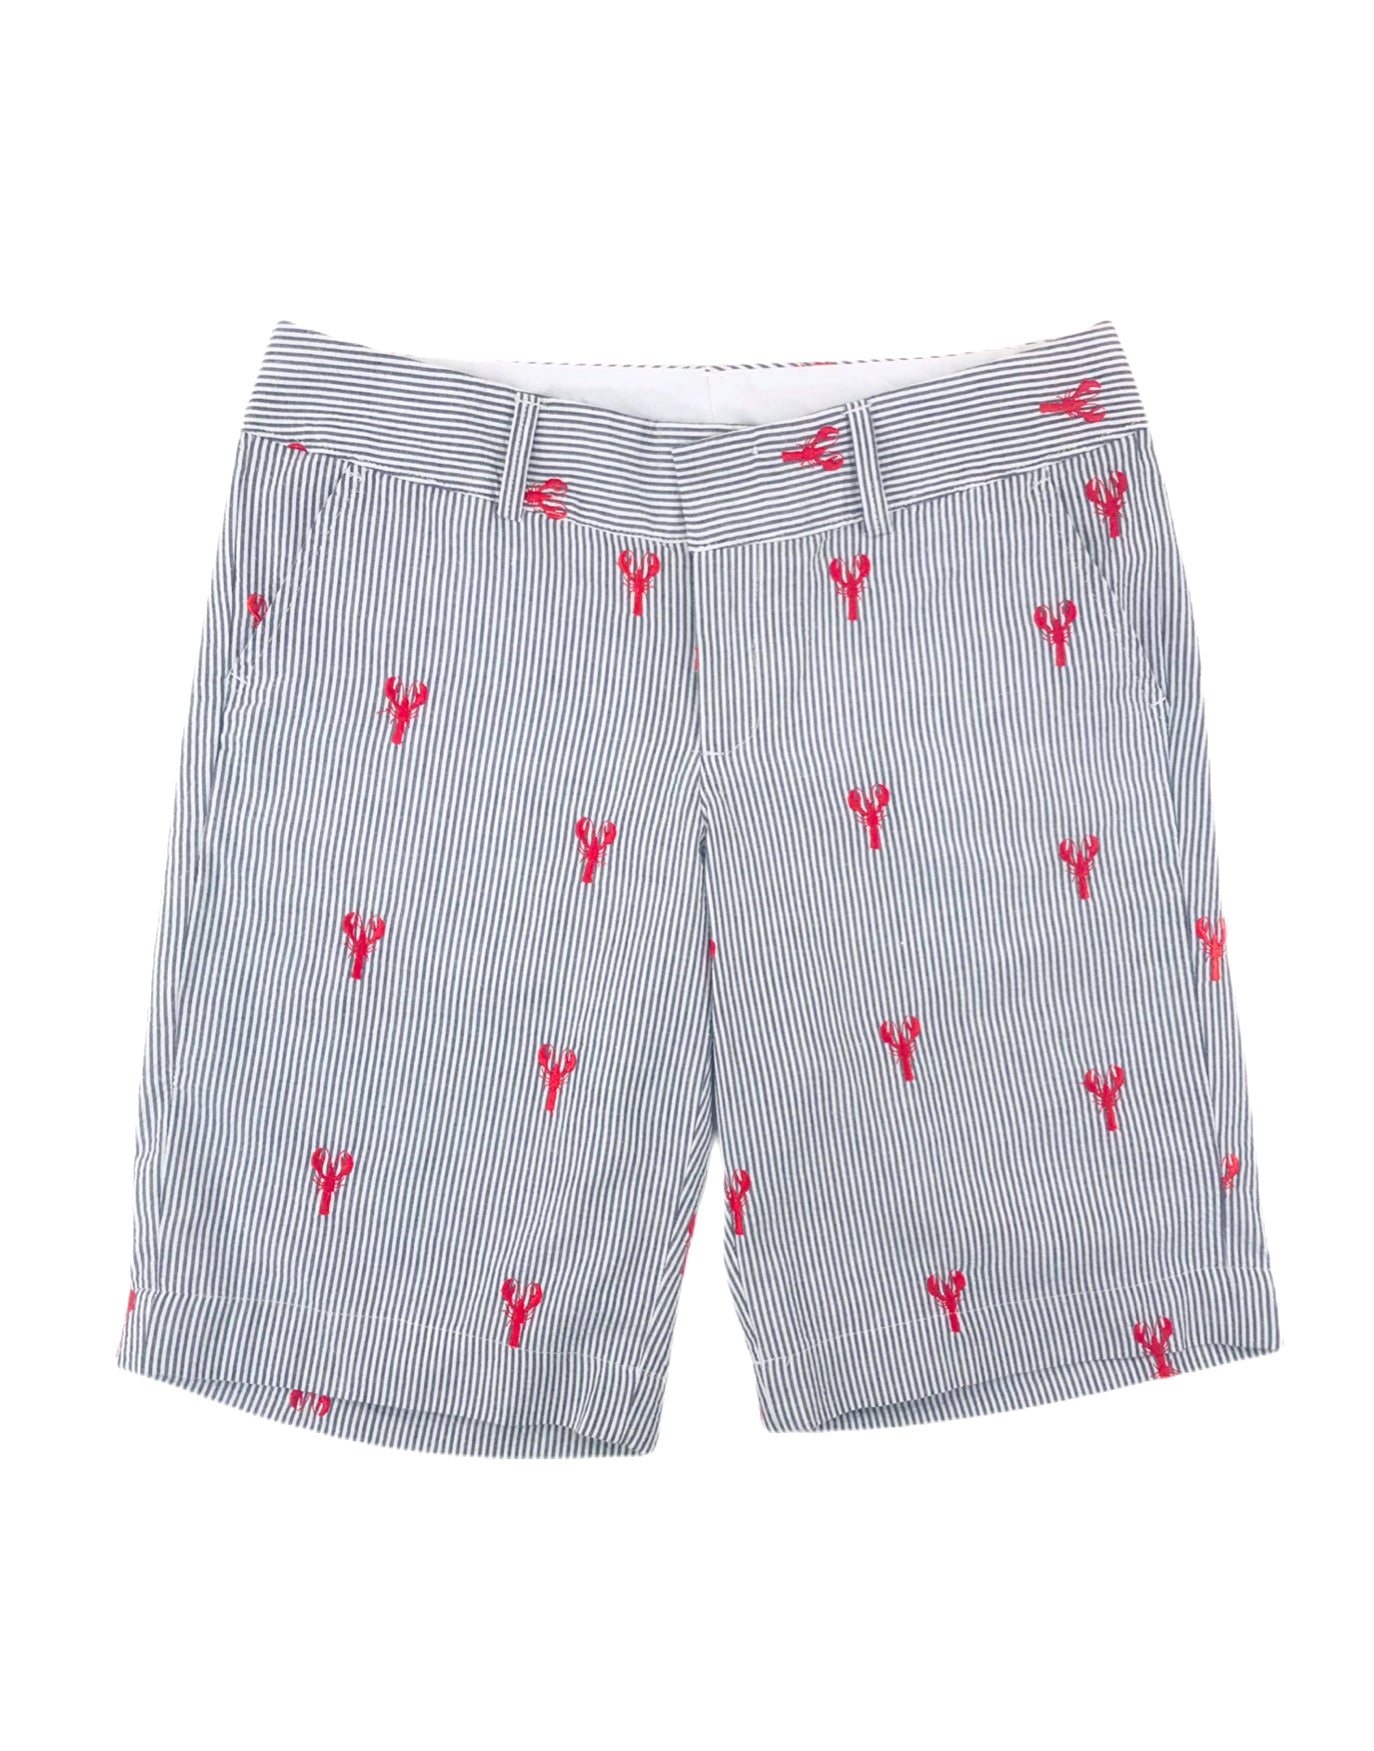 Women's Seersucker Bermuda Shorts with Red Embroidered Lobsters